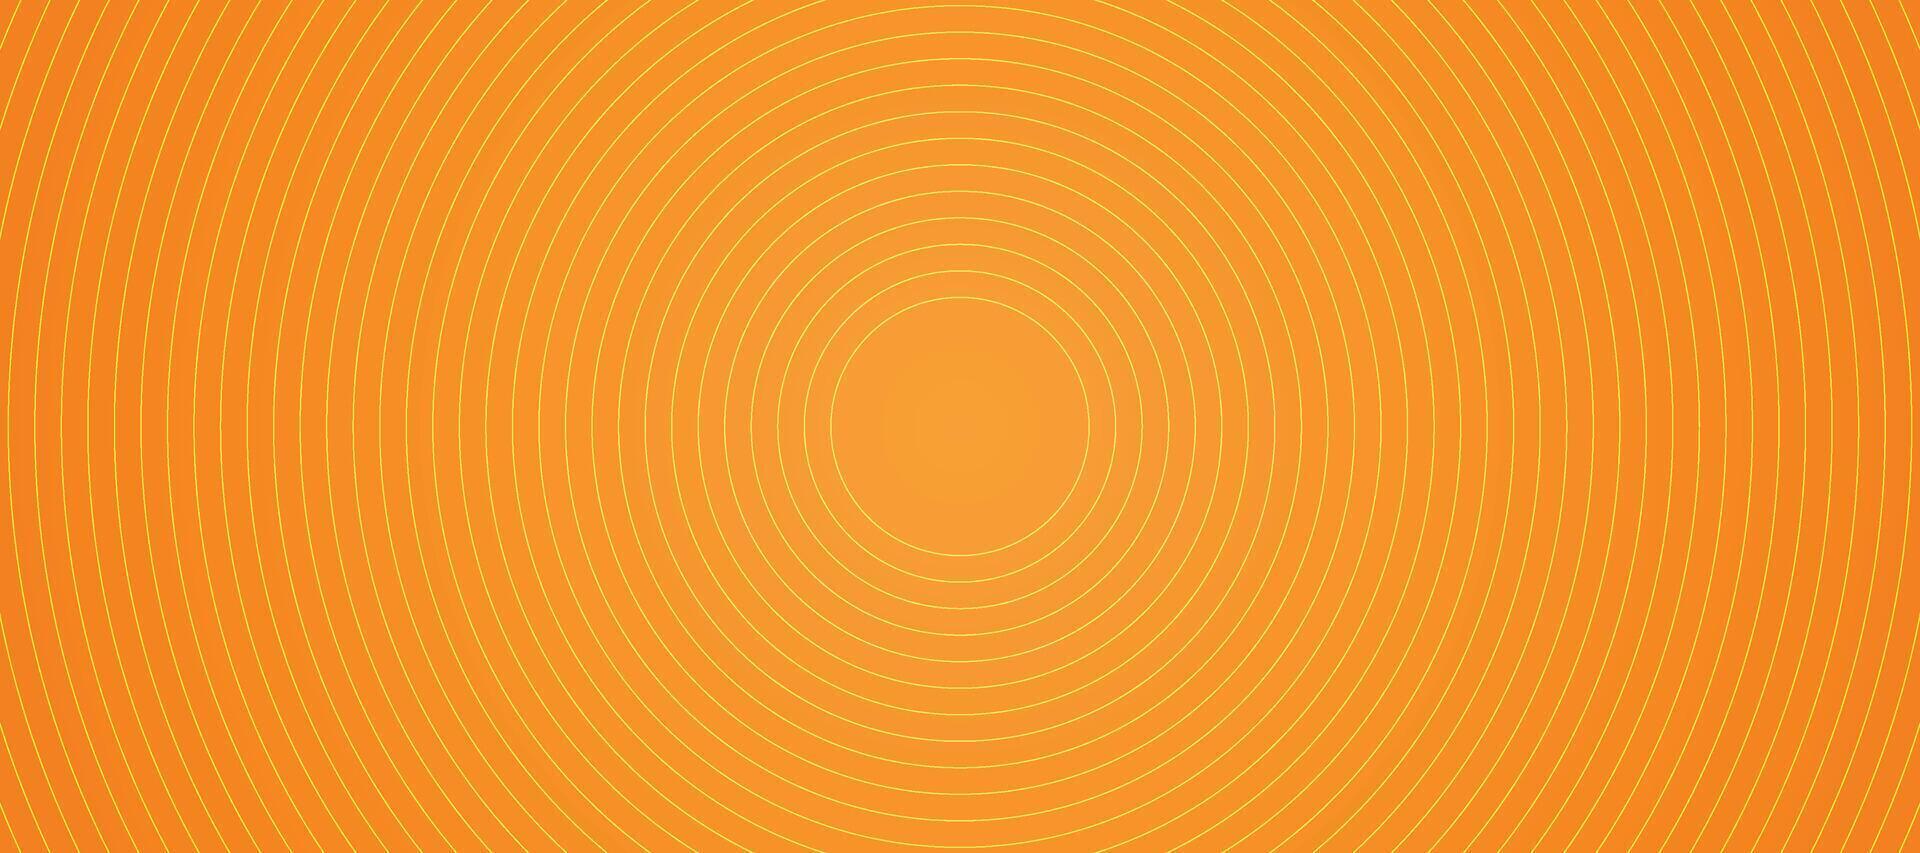 abstract background circle line pattern vector